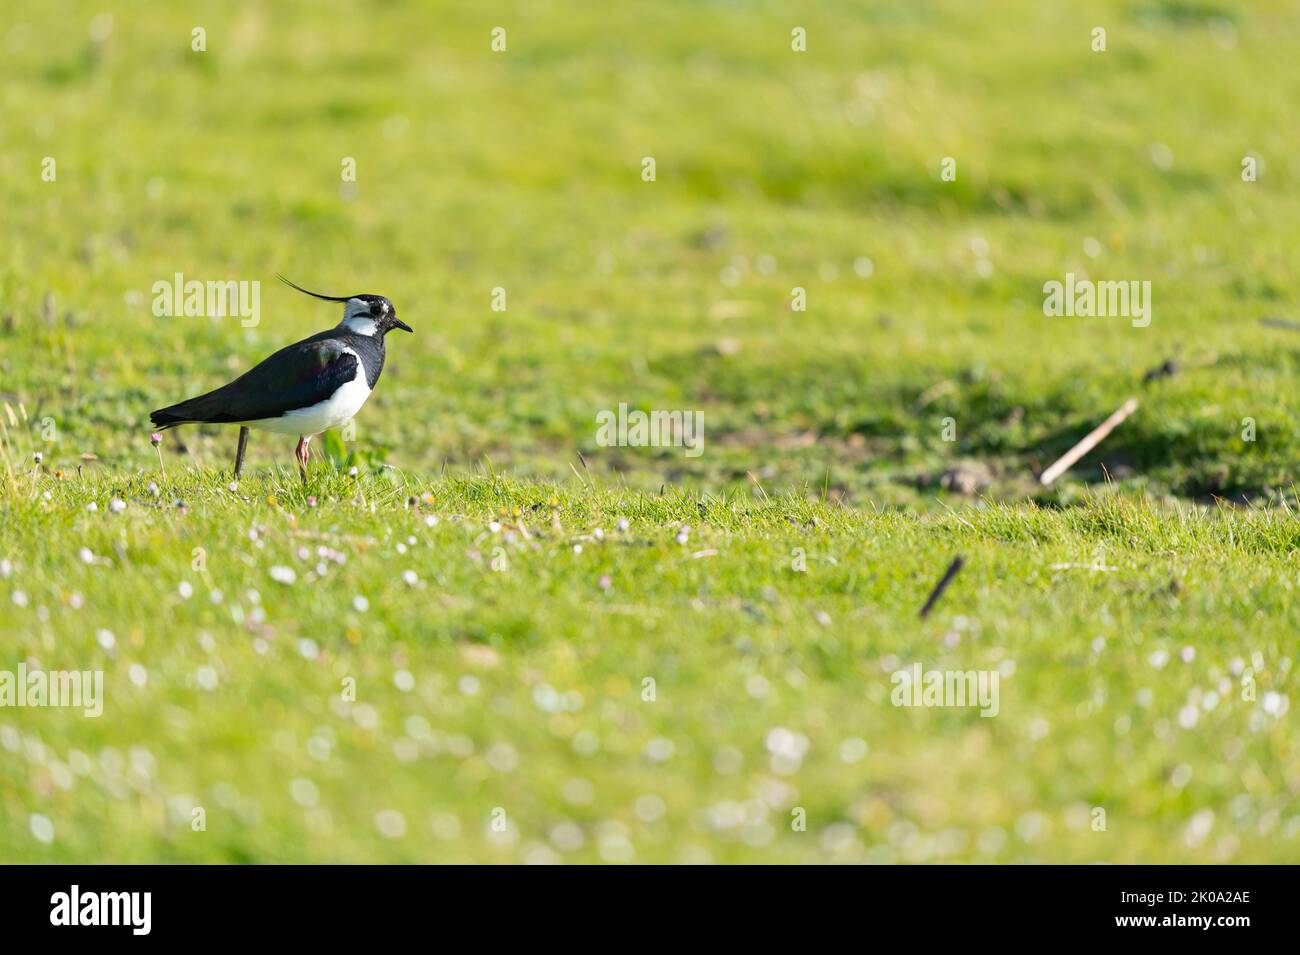 Black and white lapwing in grass at Dutch wadden island Stock Photo